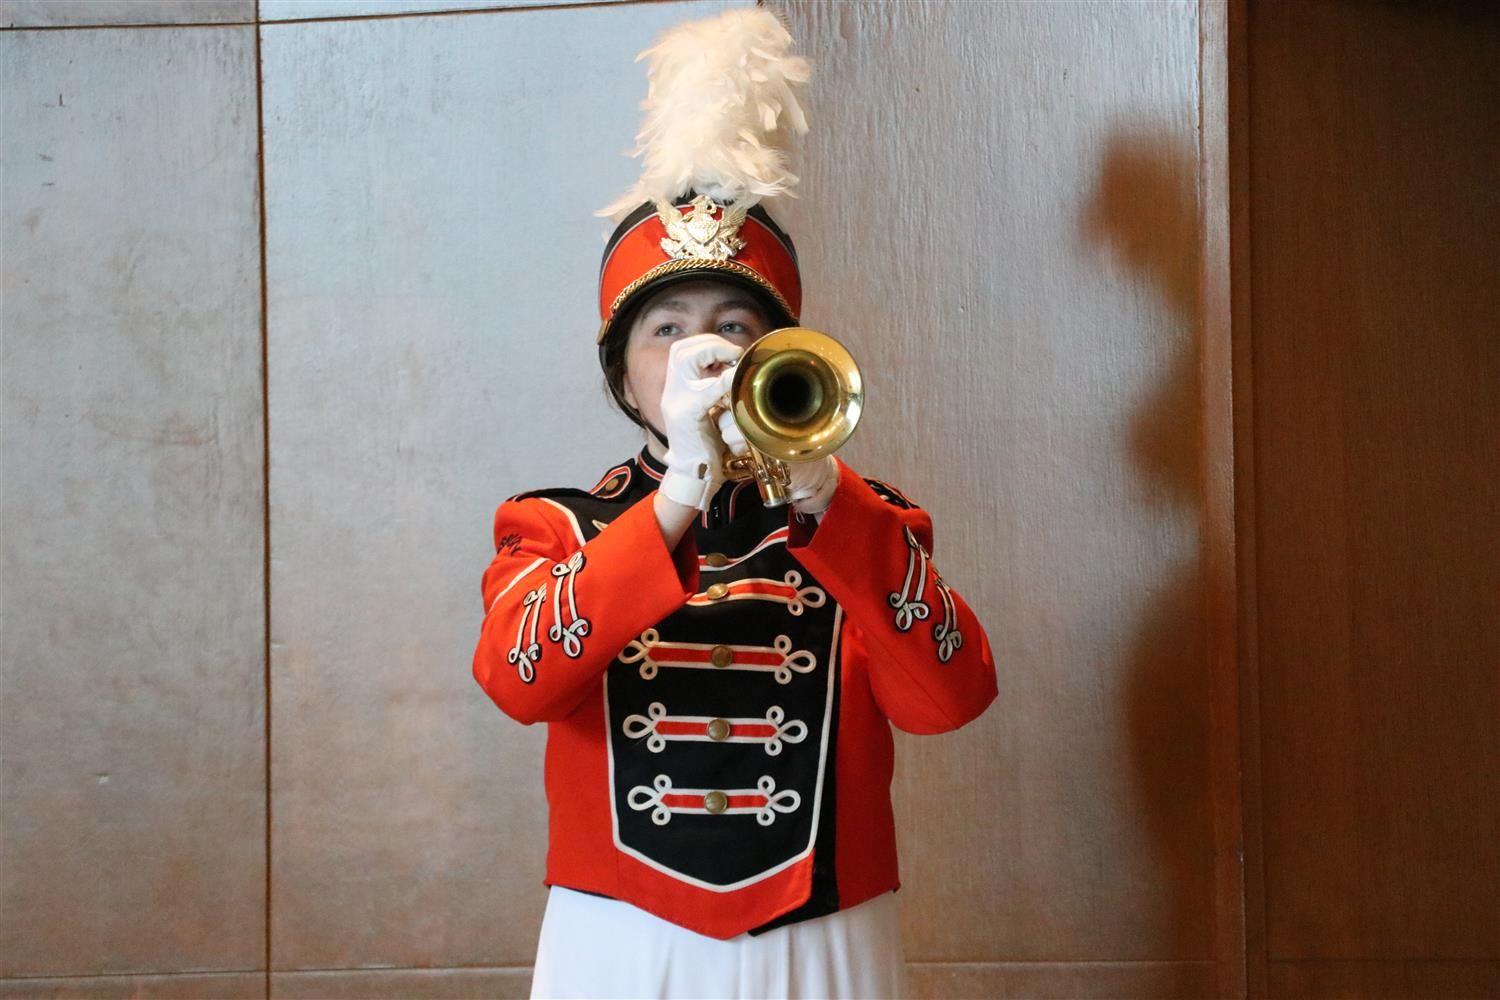 Student playing the trumpet